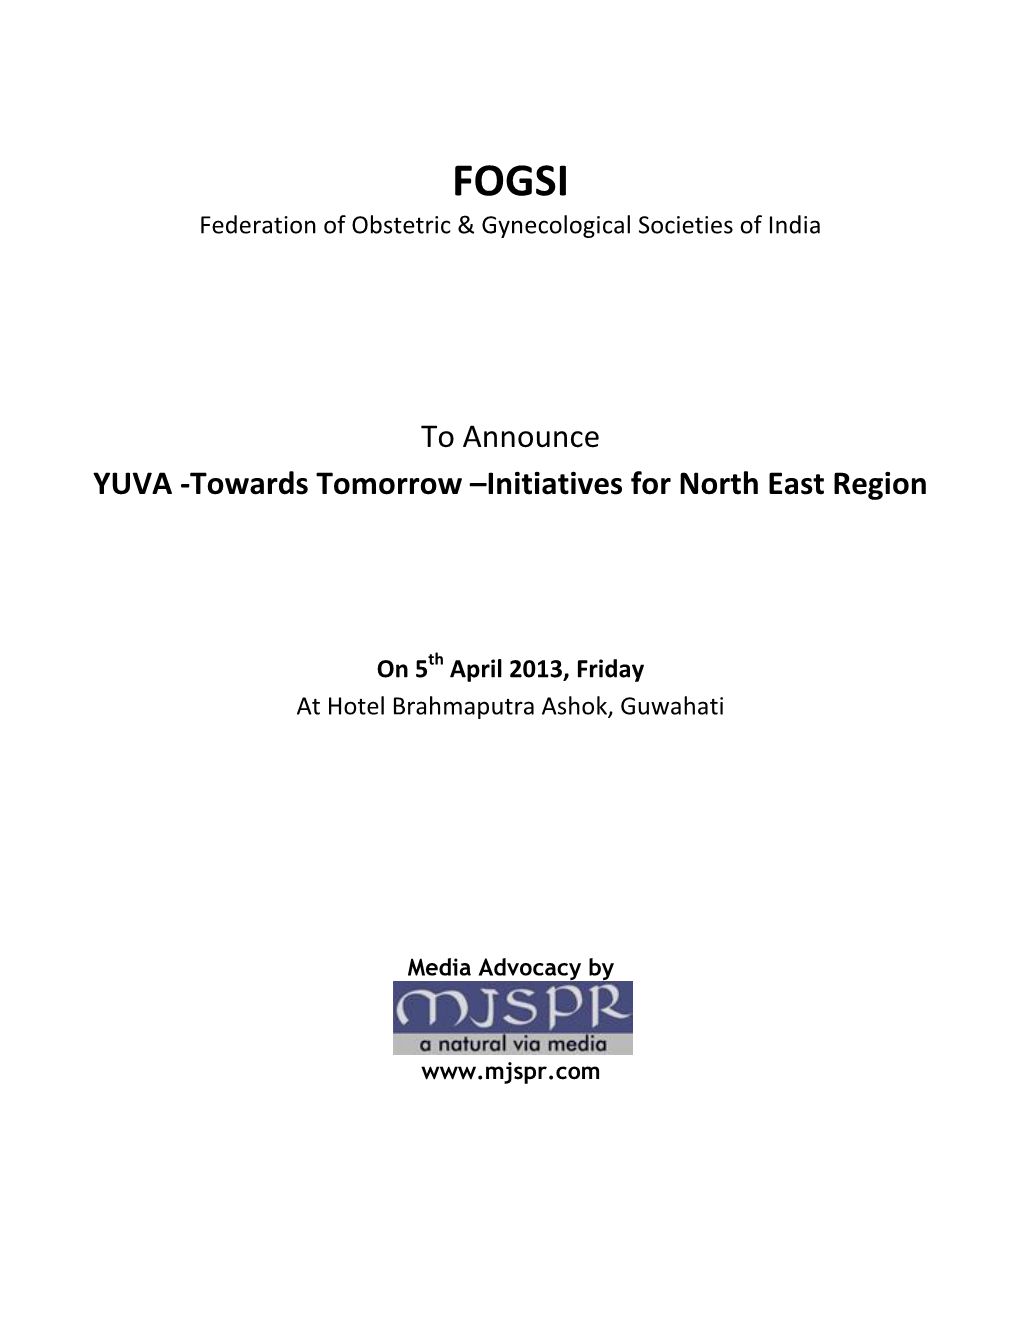 Initiatives for North East Region